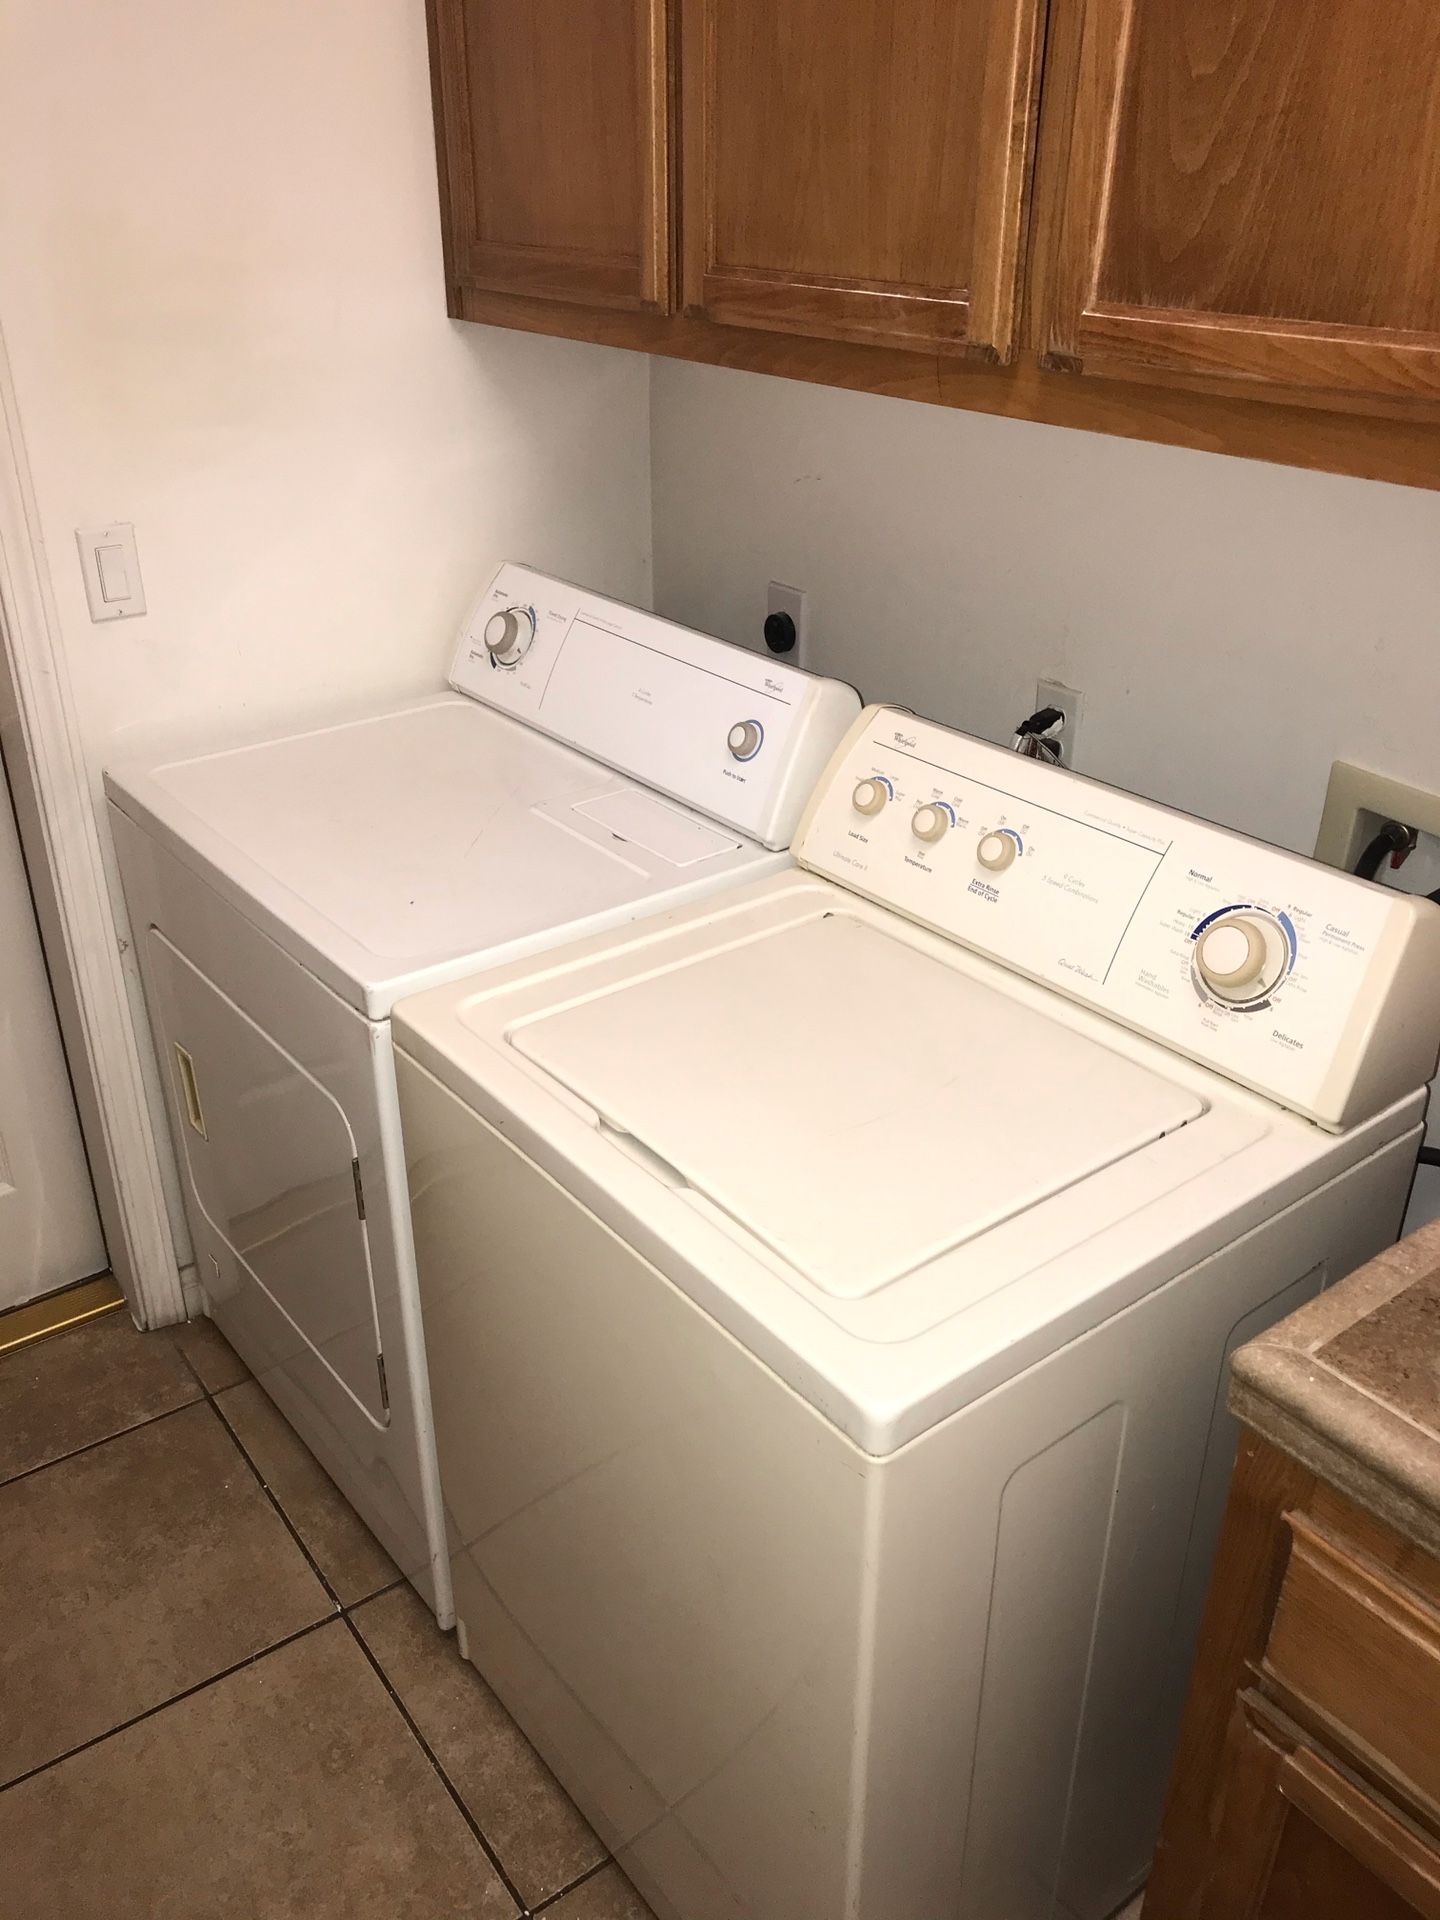 Whirlpool Washer(electric) And Dryer (gas)